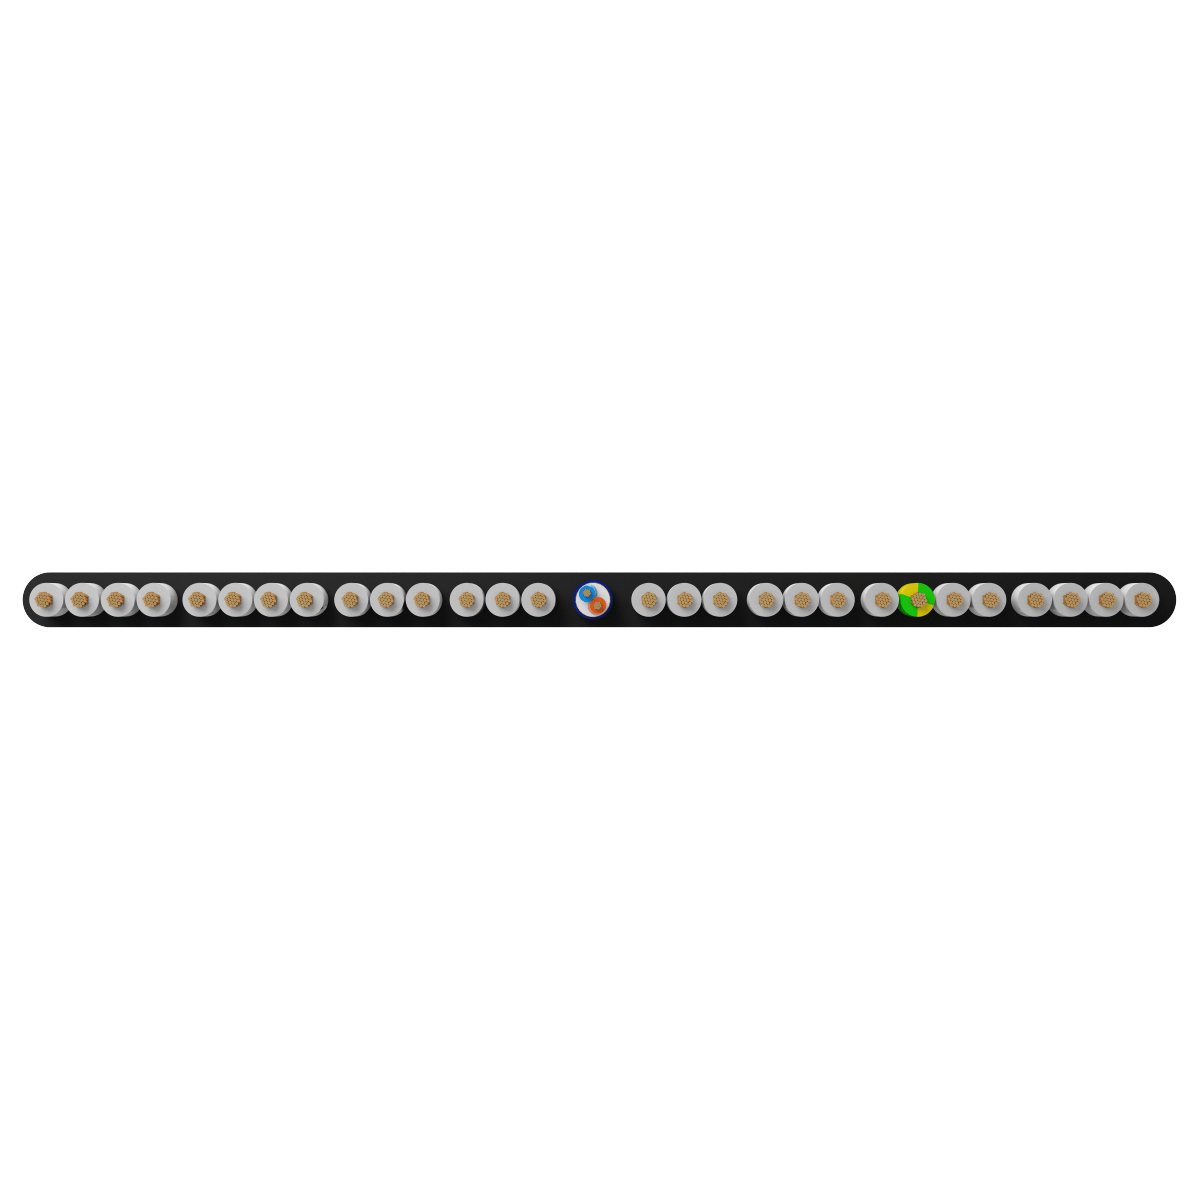 28x0.75 +1Px(2x0.22) mm² H05VVH6-F Foiled Elevator Cable